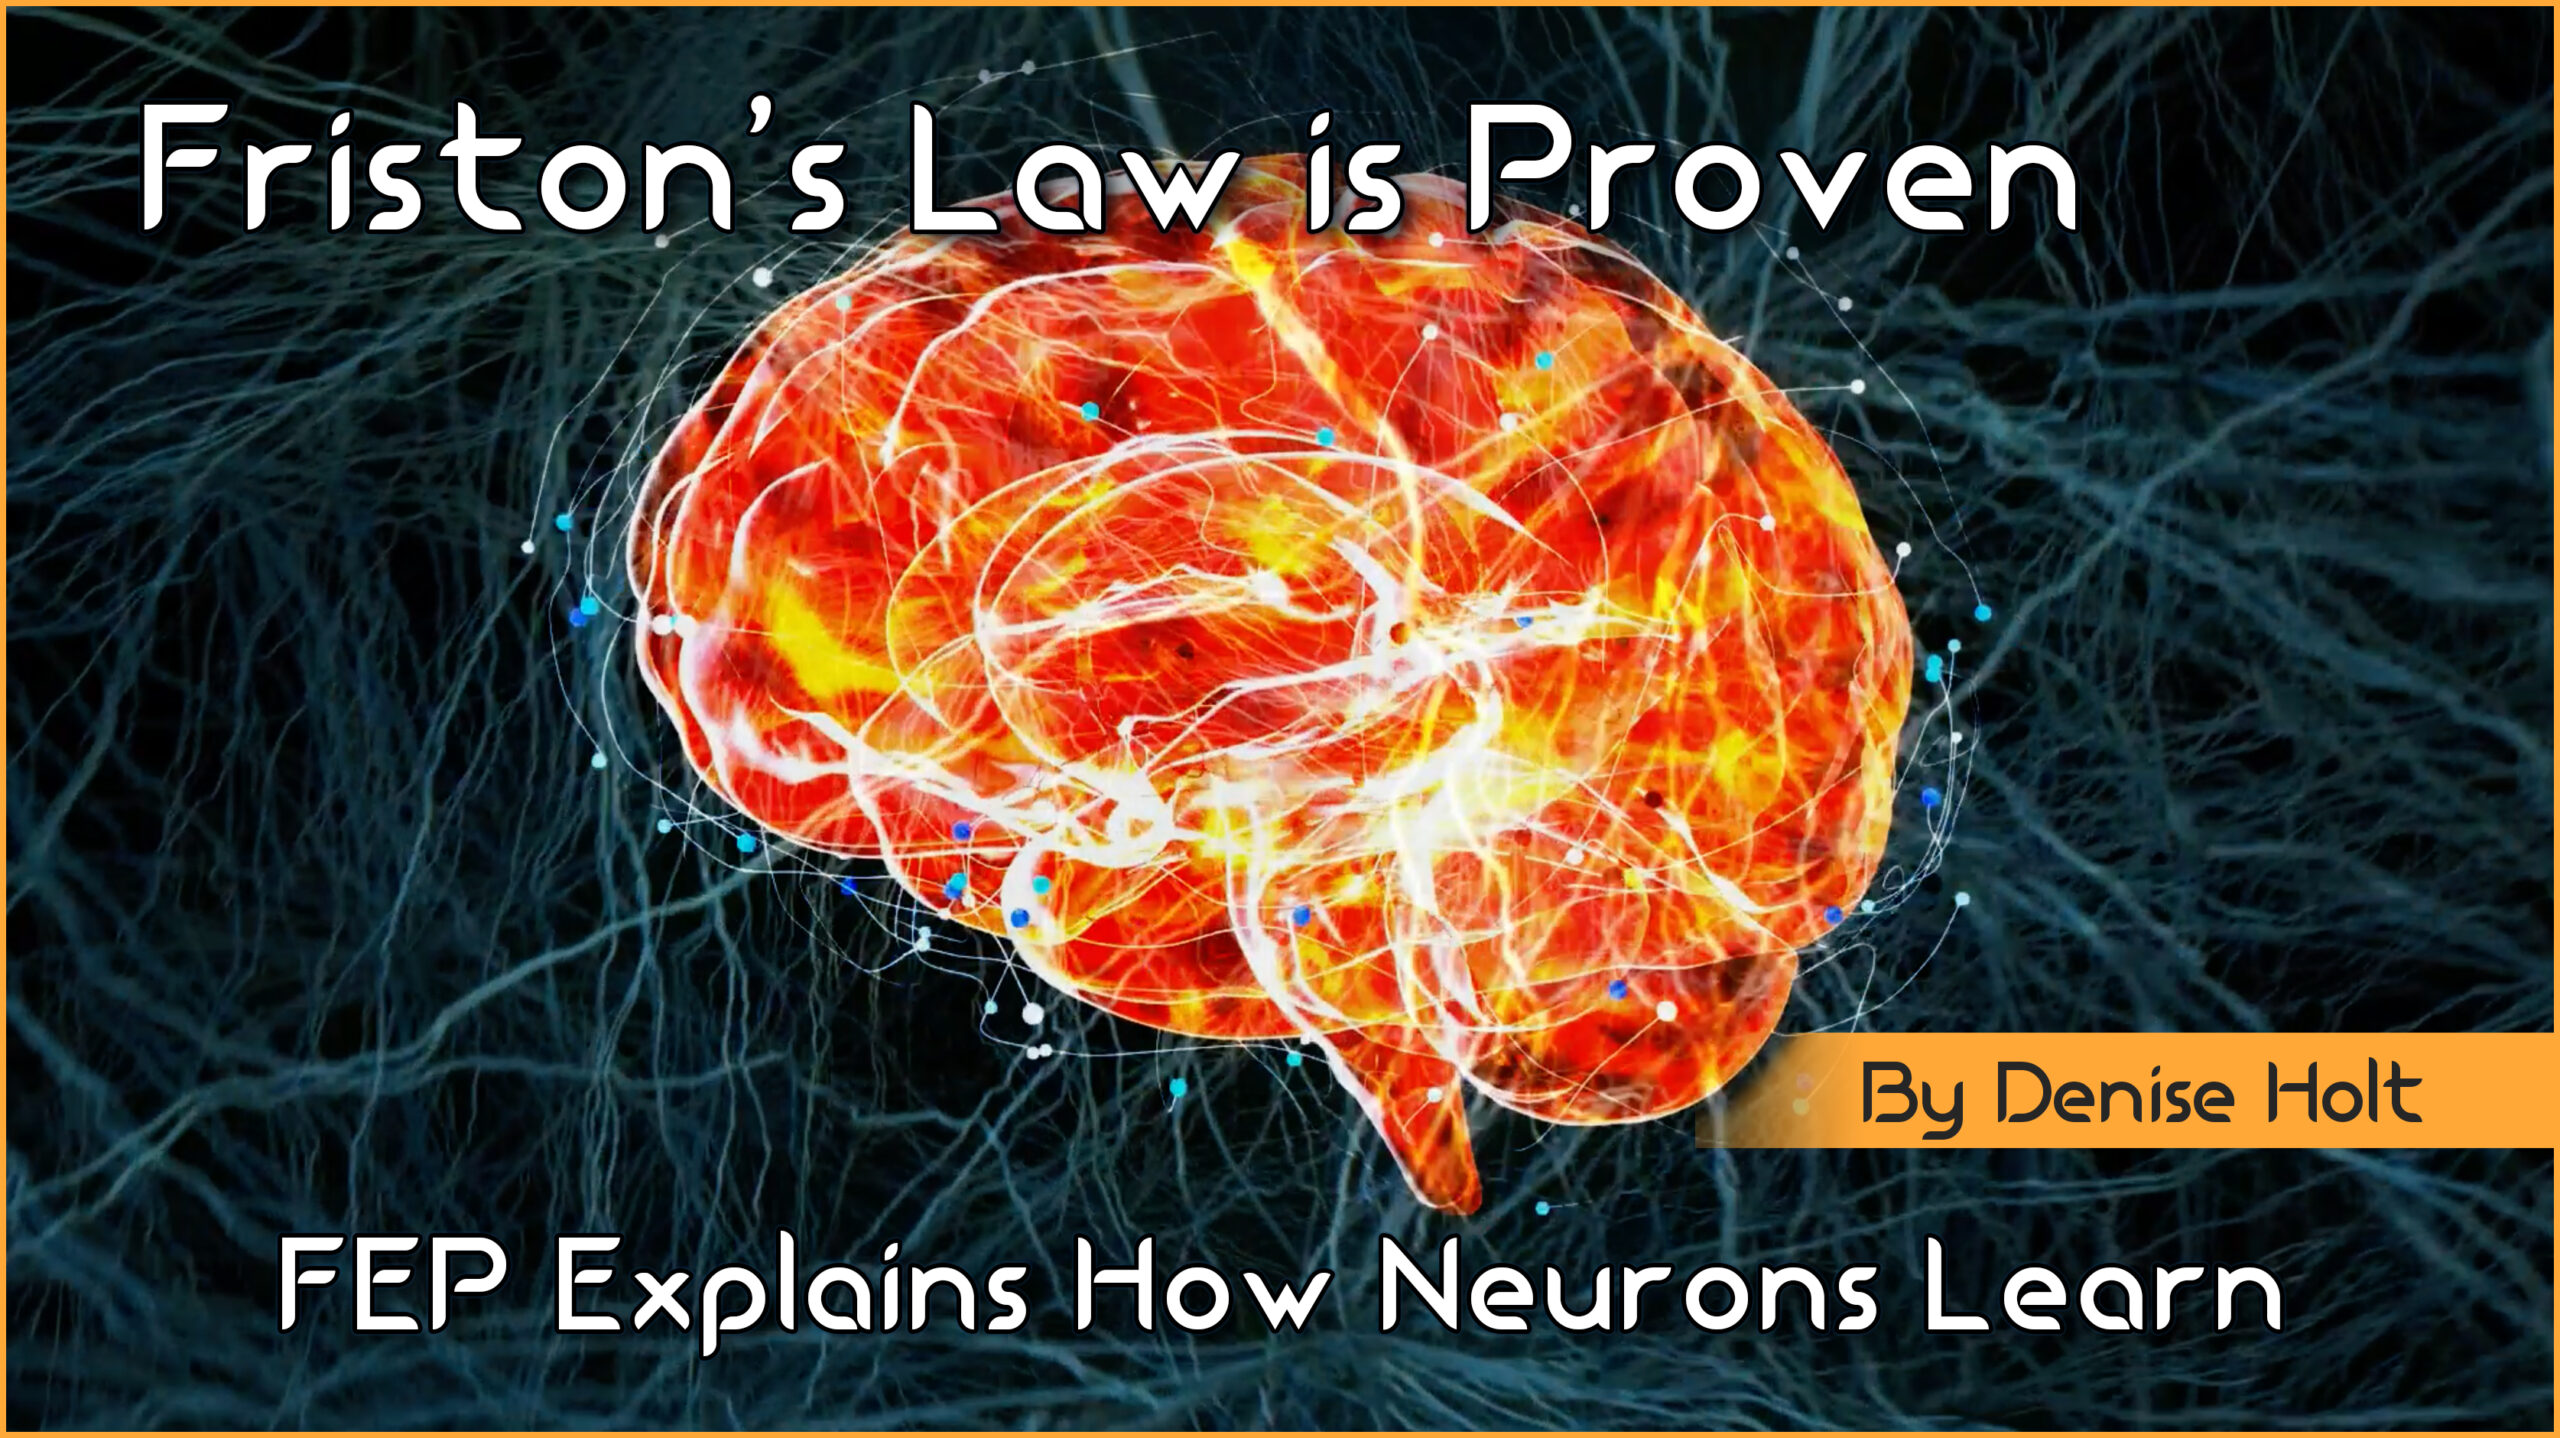 Friston’s AI Law is Proven: FEP Explains How Neurons Learn